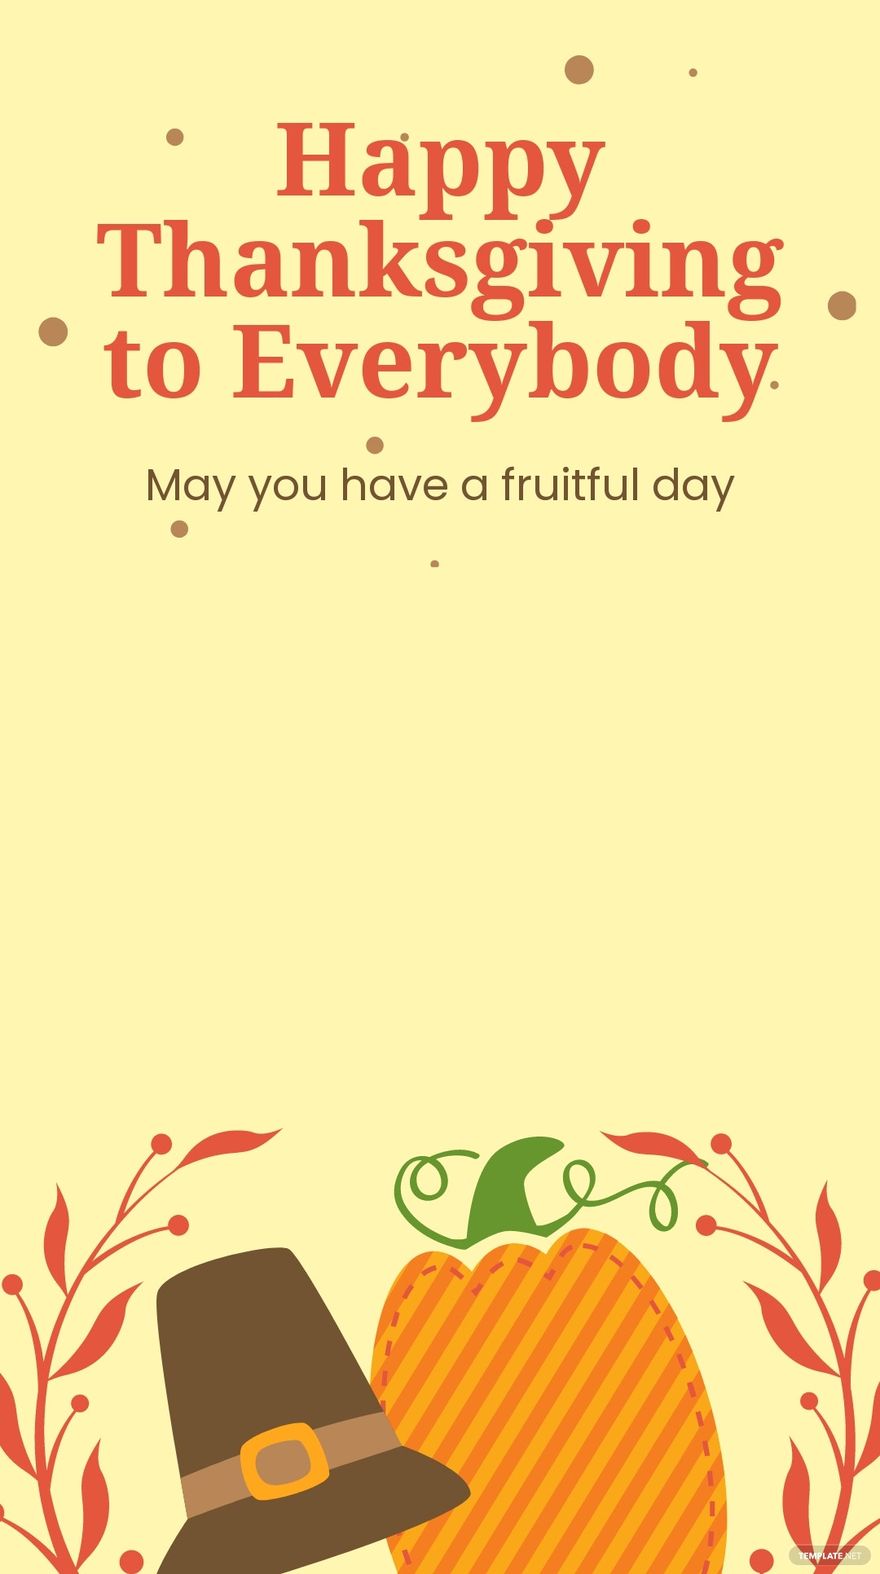 Happy Thanksgiving Snapchat Geofilter Template